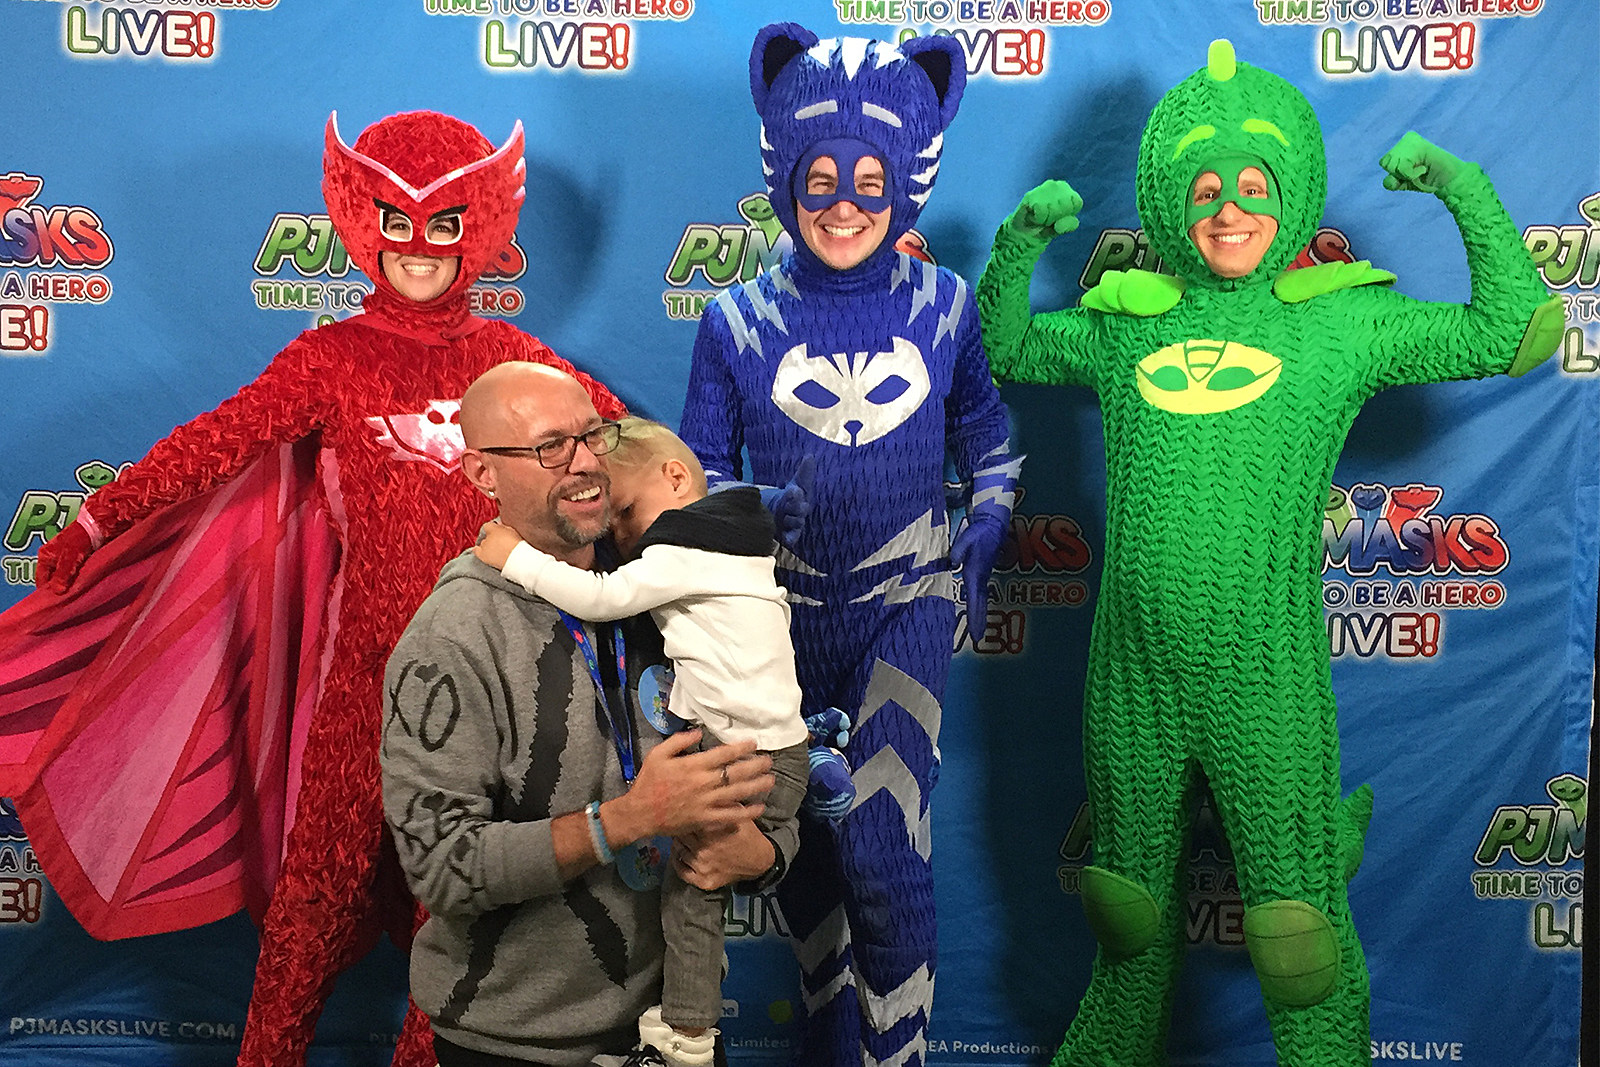 First Look Into PJ Masks Live Tour From The Idaho Center